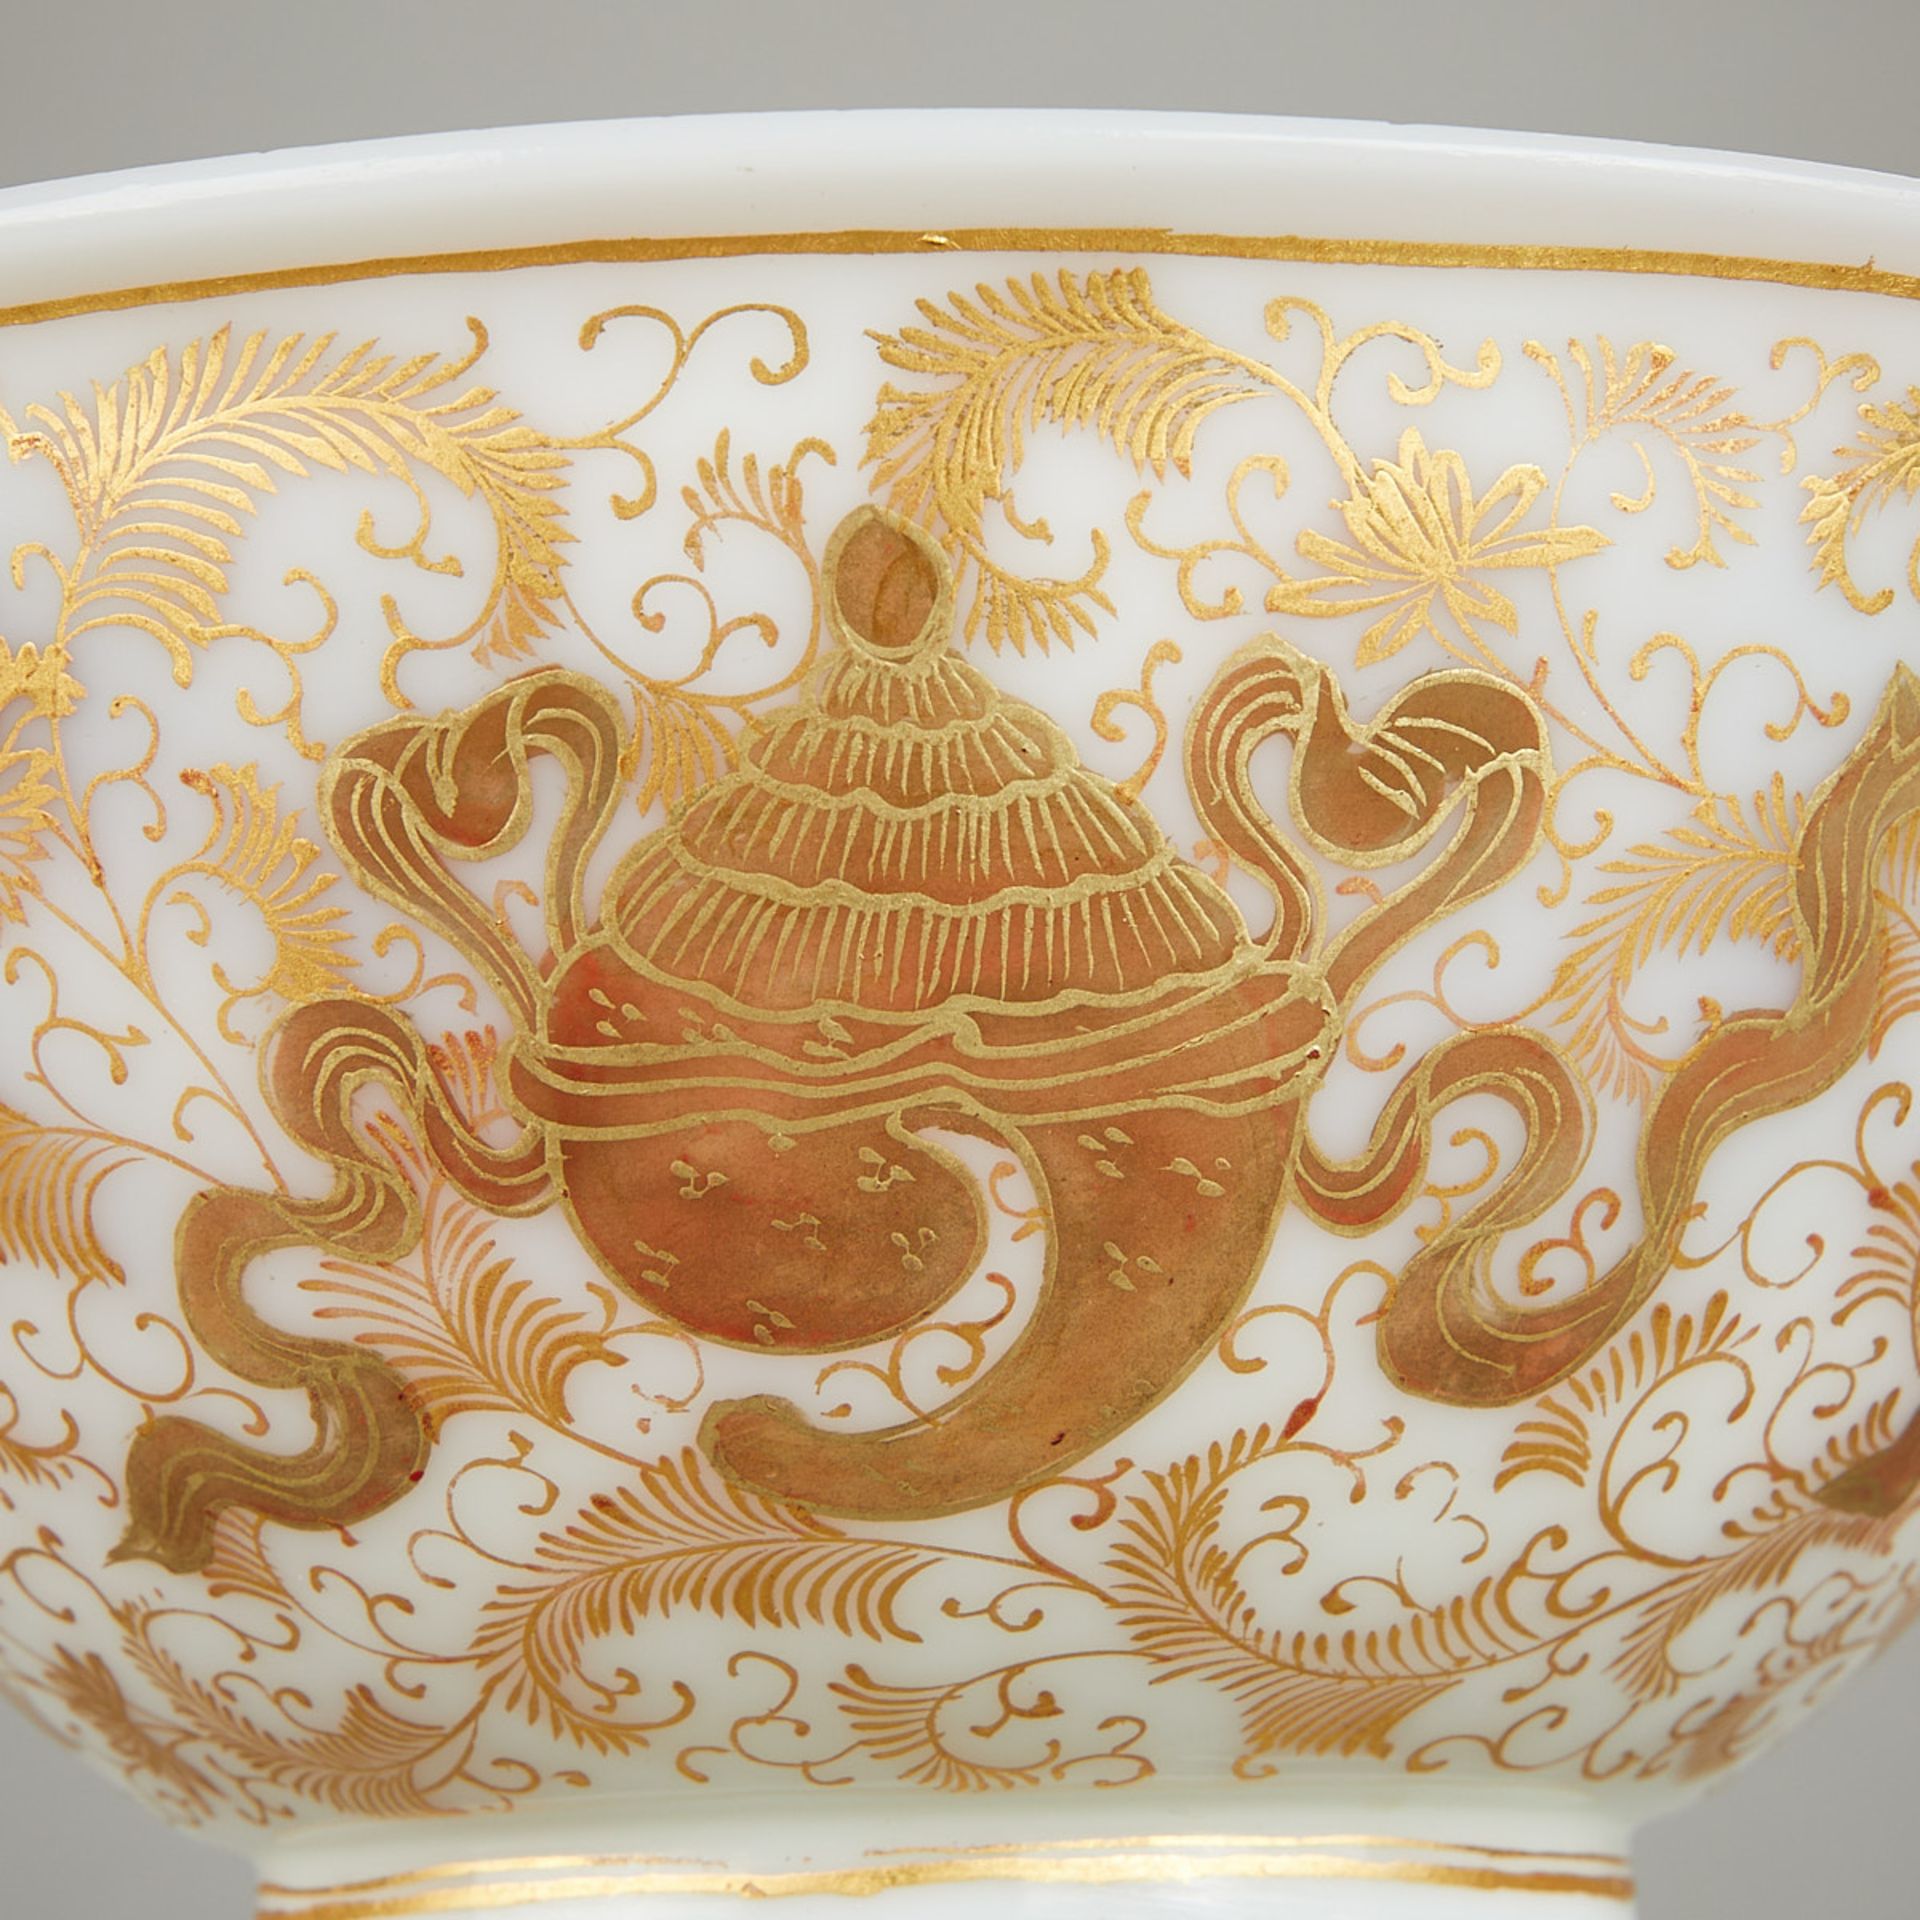 Rare Chinese Gilt Semi-Opaque White Glass Bowl - Image 9 of 16